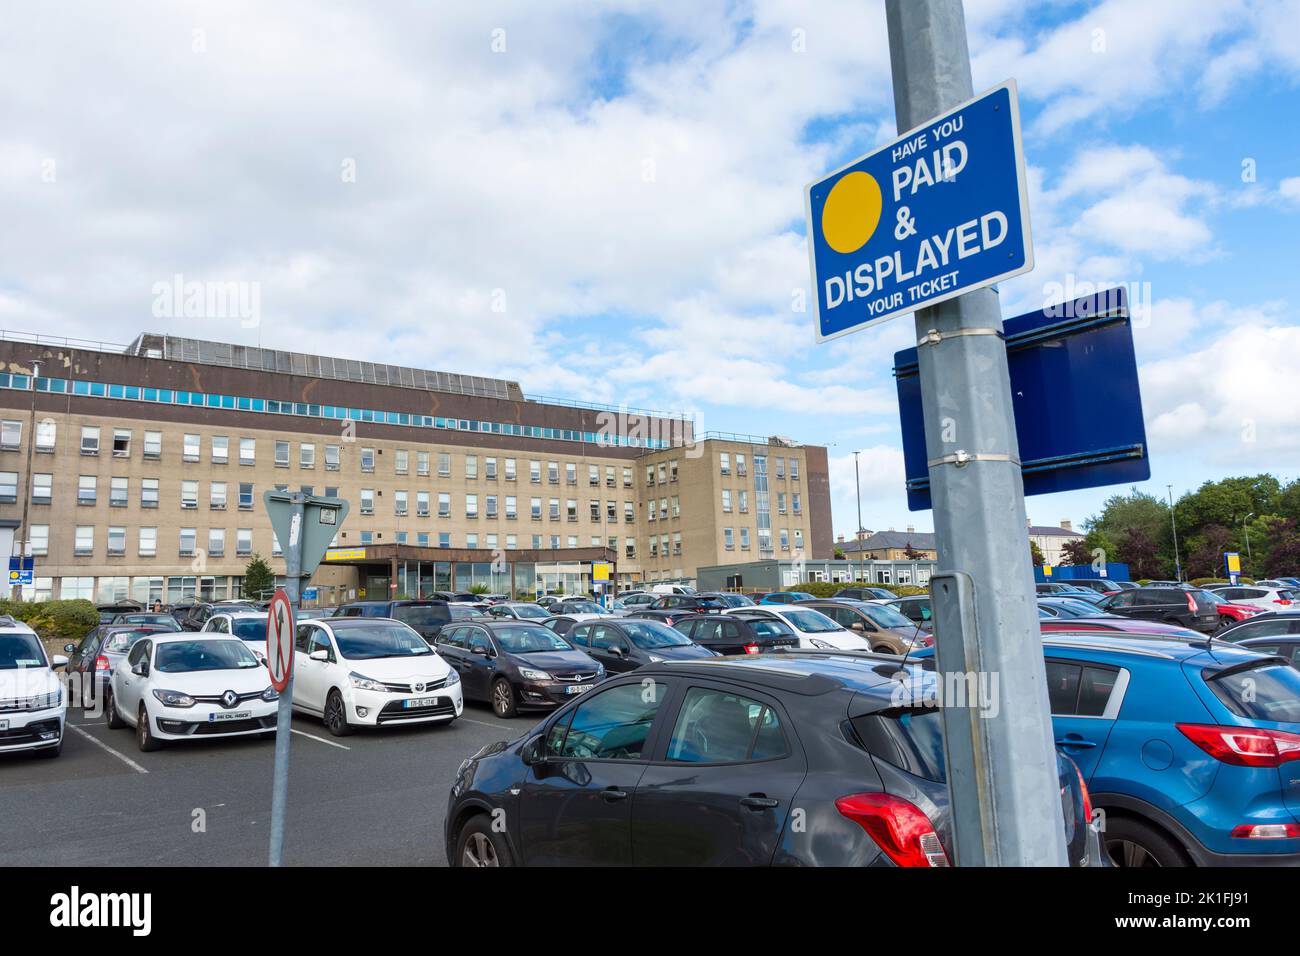 Frontage exterior of Letterkenny University Hospital (LUH), Pay and display car parking, County Donegal, Ireland Stock Photo